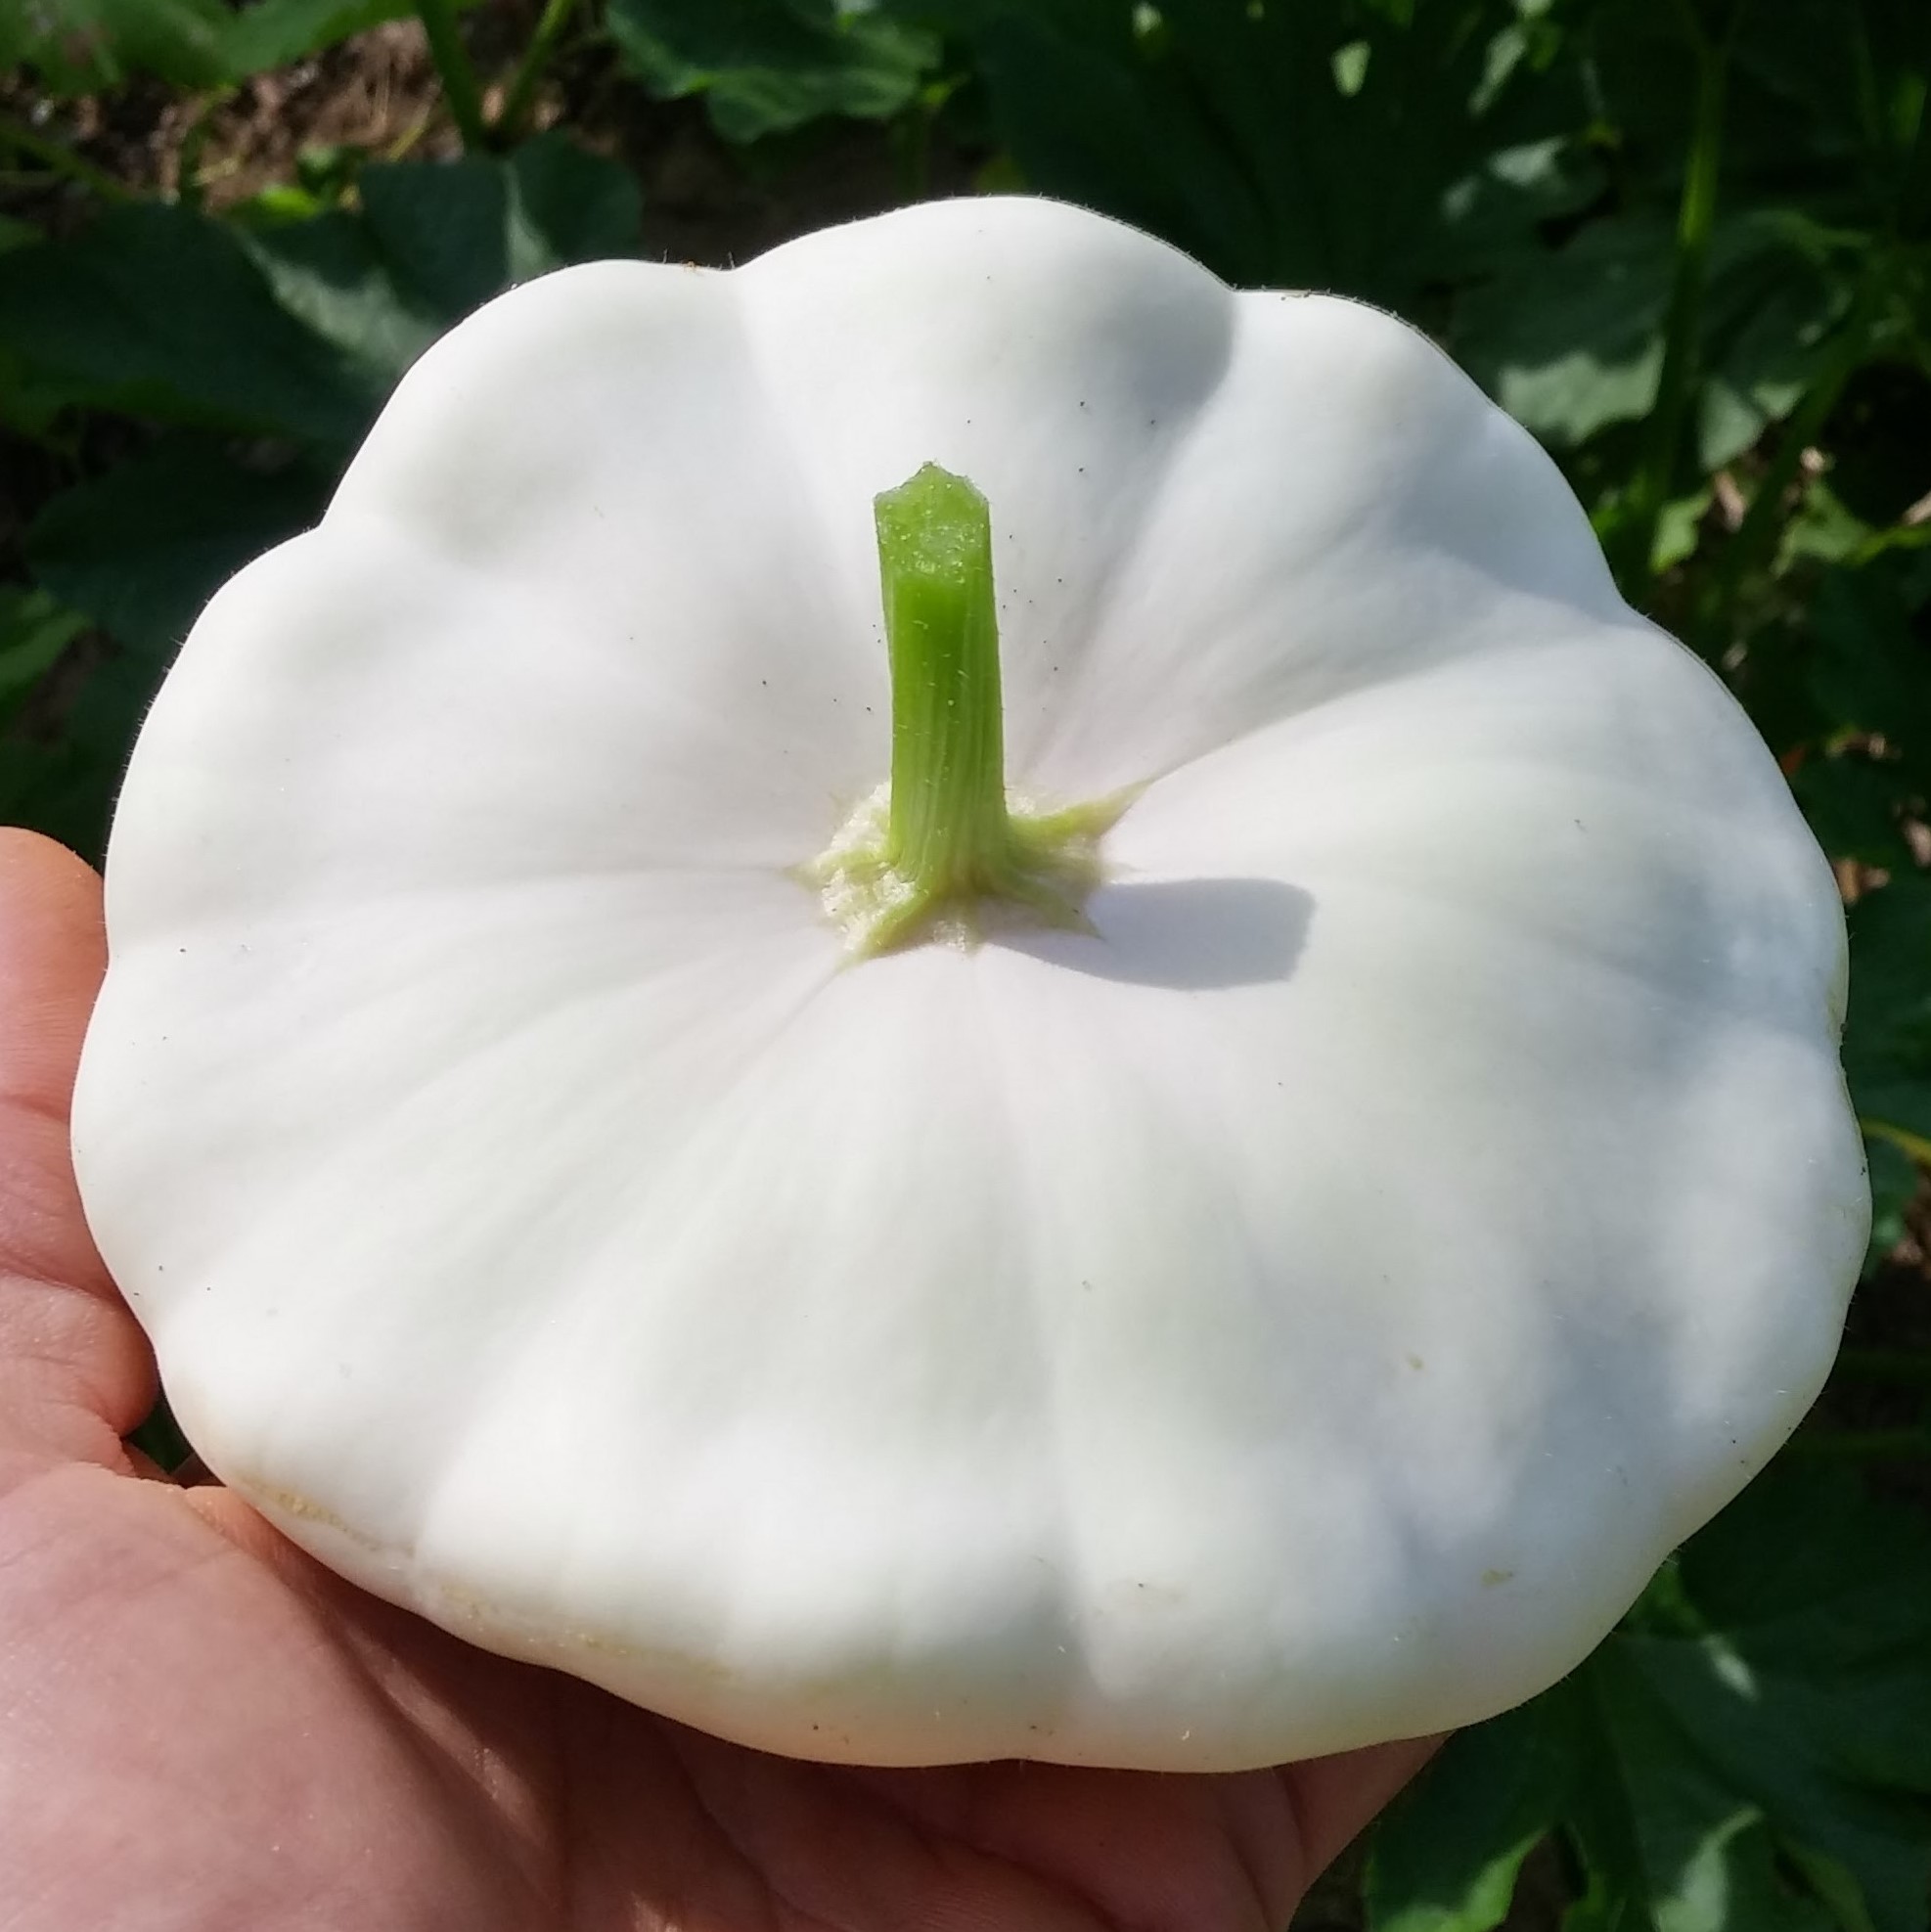 https://seedsforgenerations.com/wp-content/uploads/sites/2/2013/07/Summer-Squash-White-Scallop-Patty-Pan-20160725_094246_HDR-Square.jpg